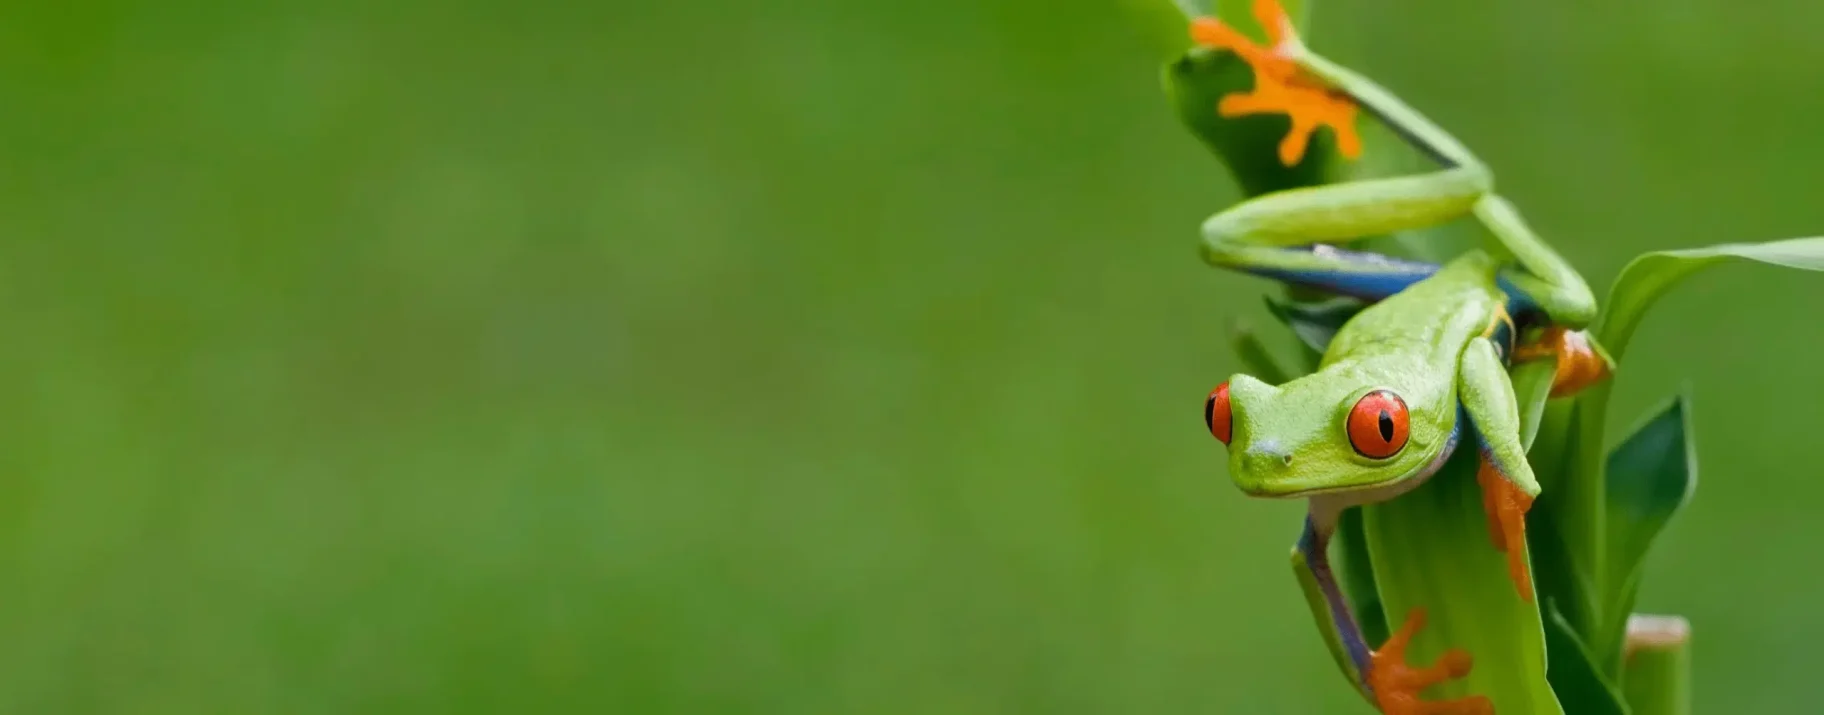 frog-on-leaf-wide.png-scaled-1824x715